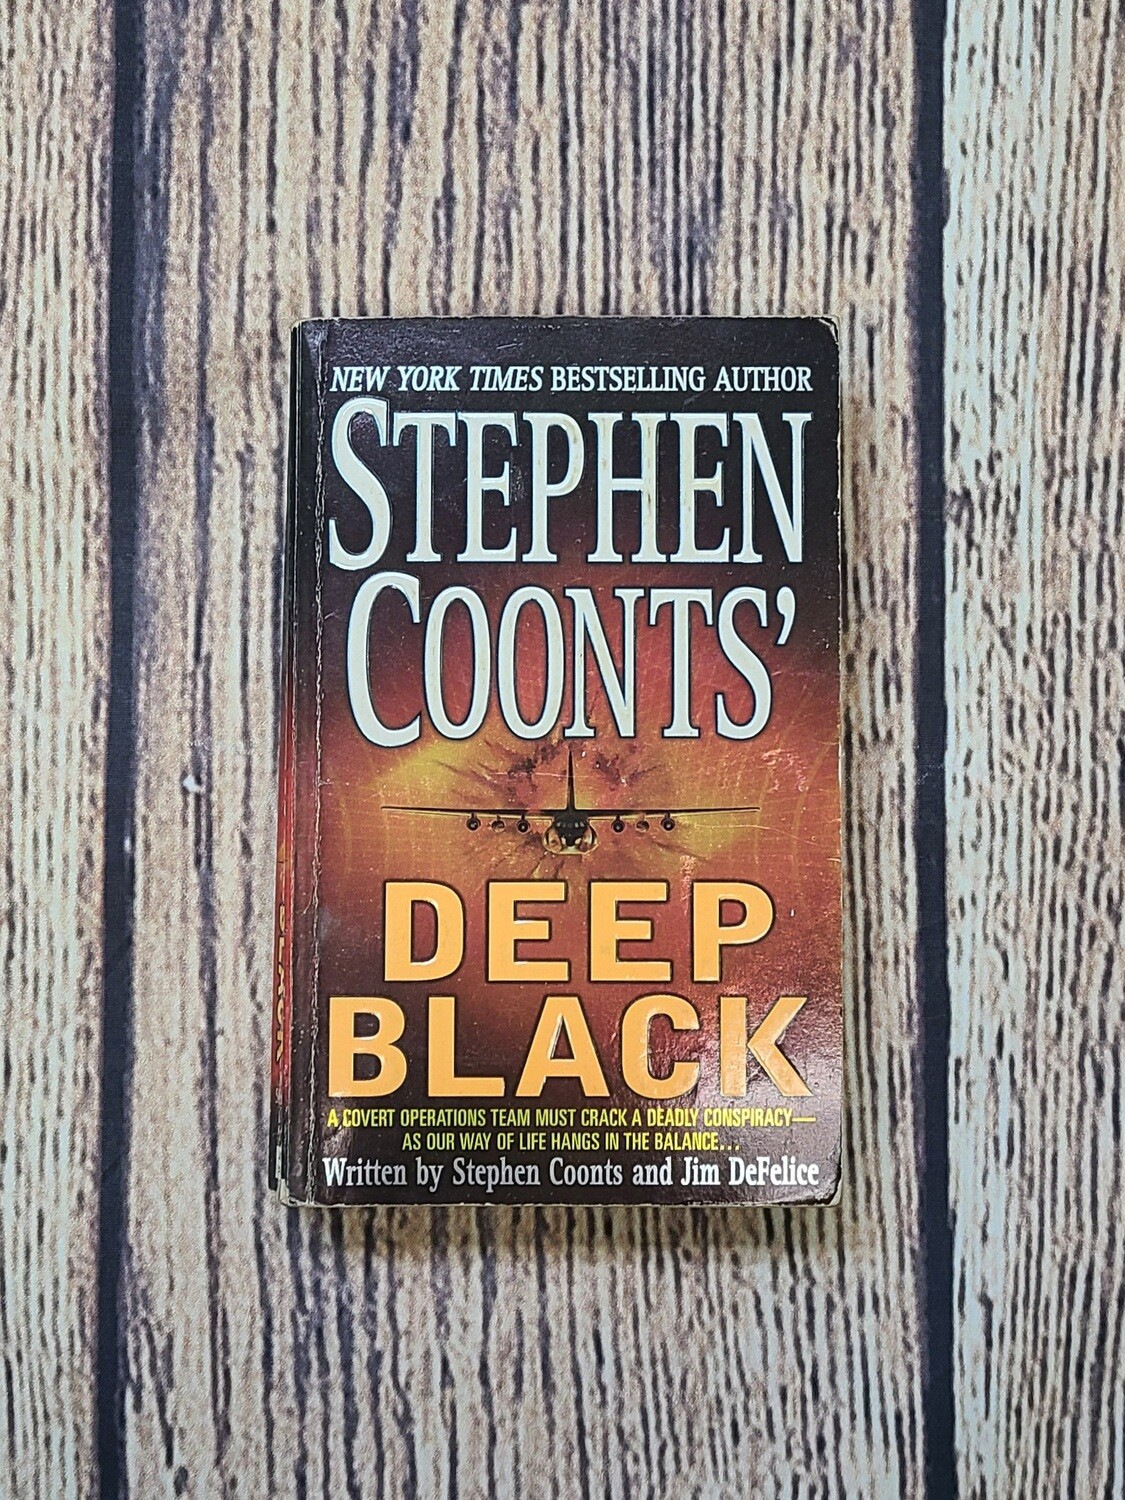 Deep Black by Stephen Coonts'